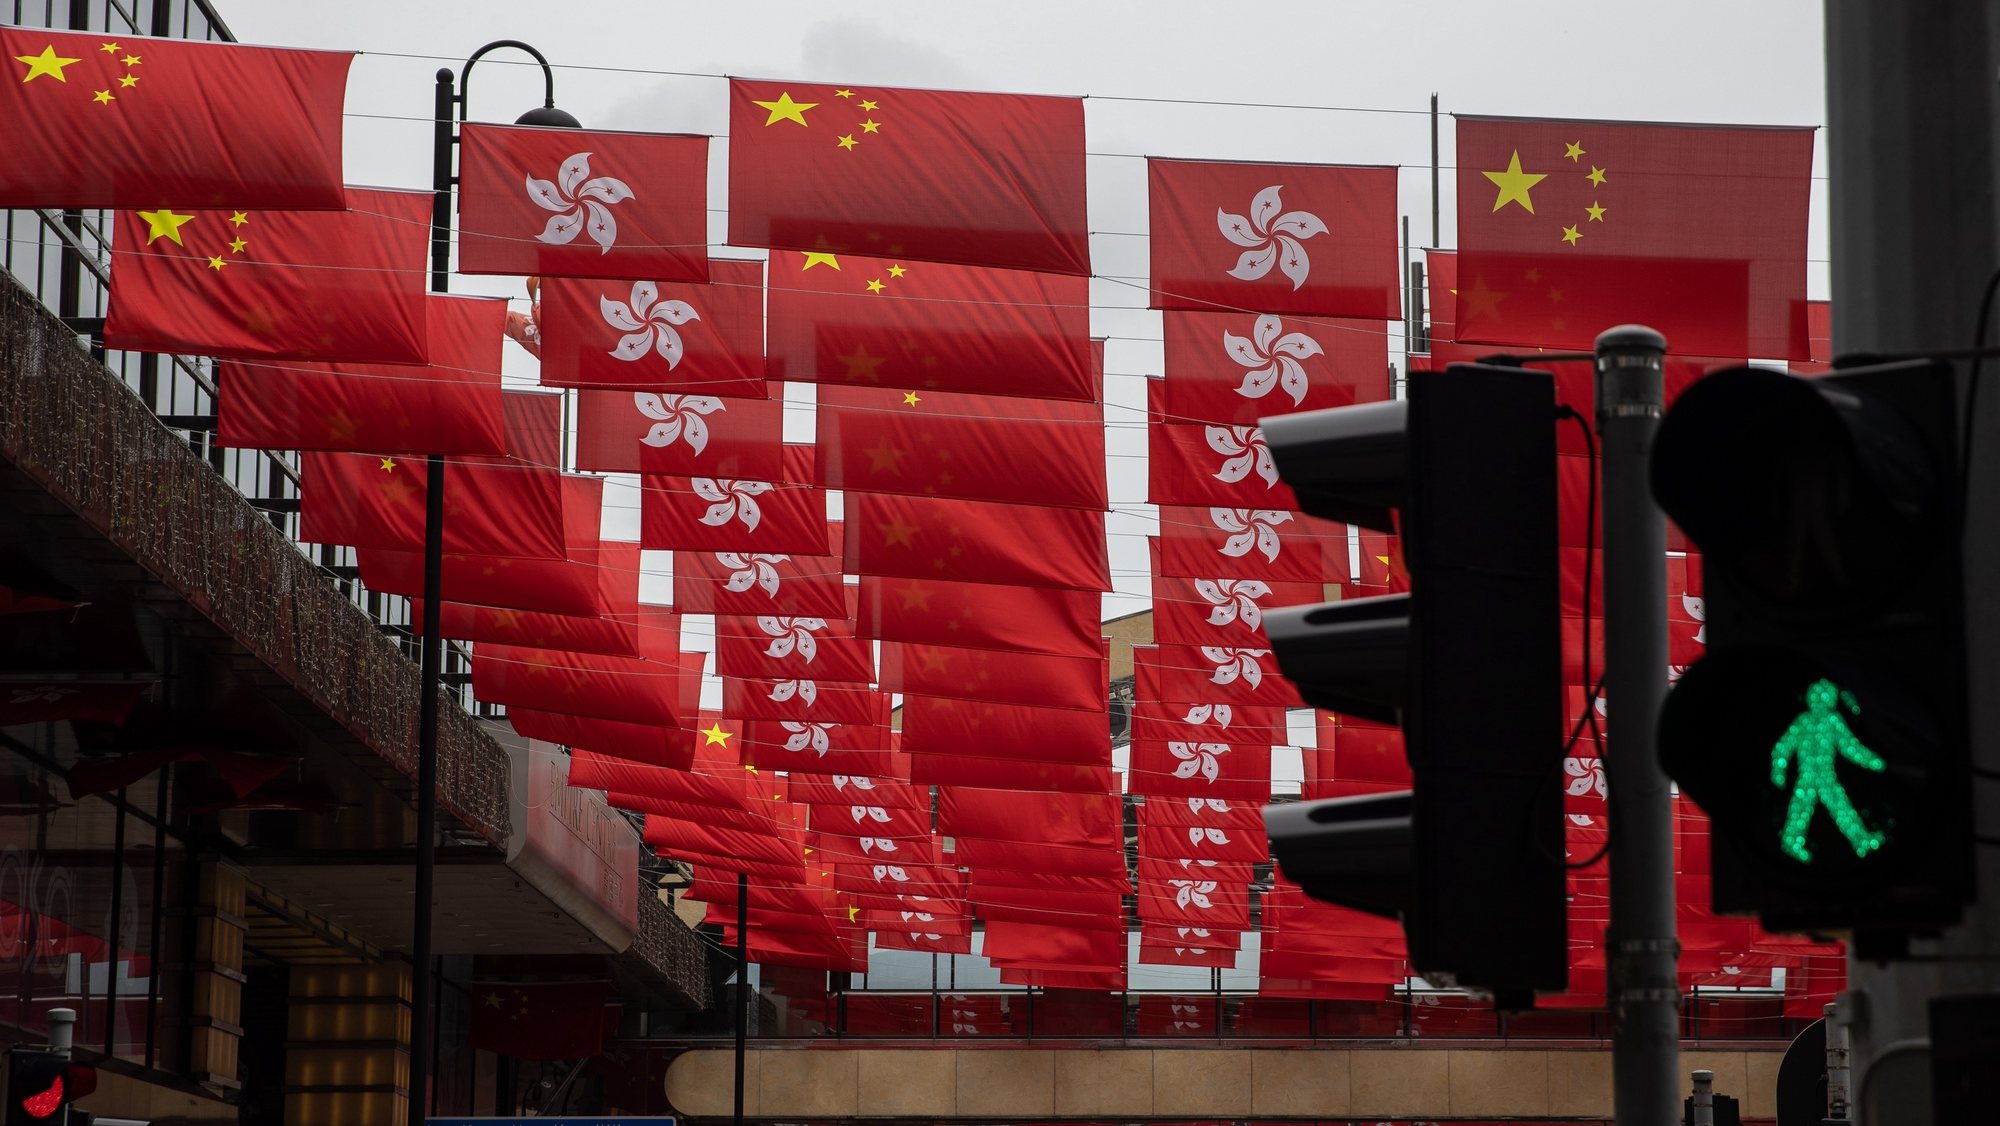 epa09307087 Flags of the Peopleâ€™s Republic of China and the Hong Kong SAR are displayed in a street in Hong Kong, China, 28 June 2021. China, Hong Kong and Macau will celebrate the 100th anniversary of the founding of the Chinese Communist Party on 01 July 2021.  EPA/JEROME FAVRE